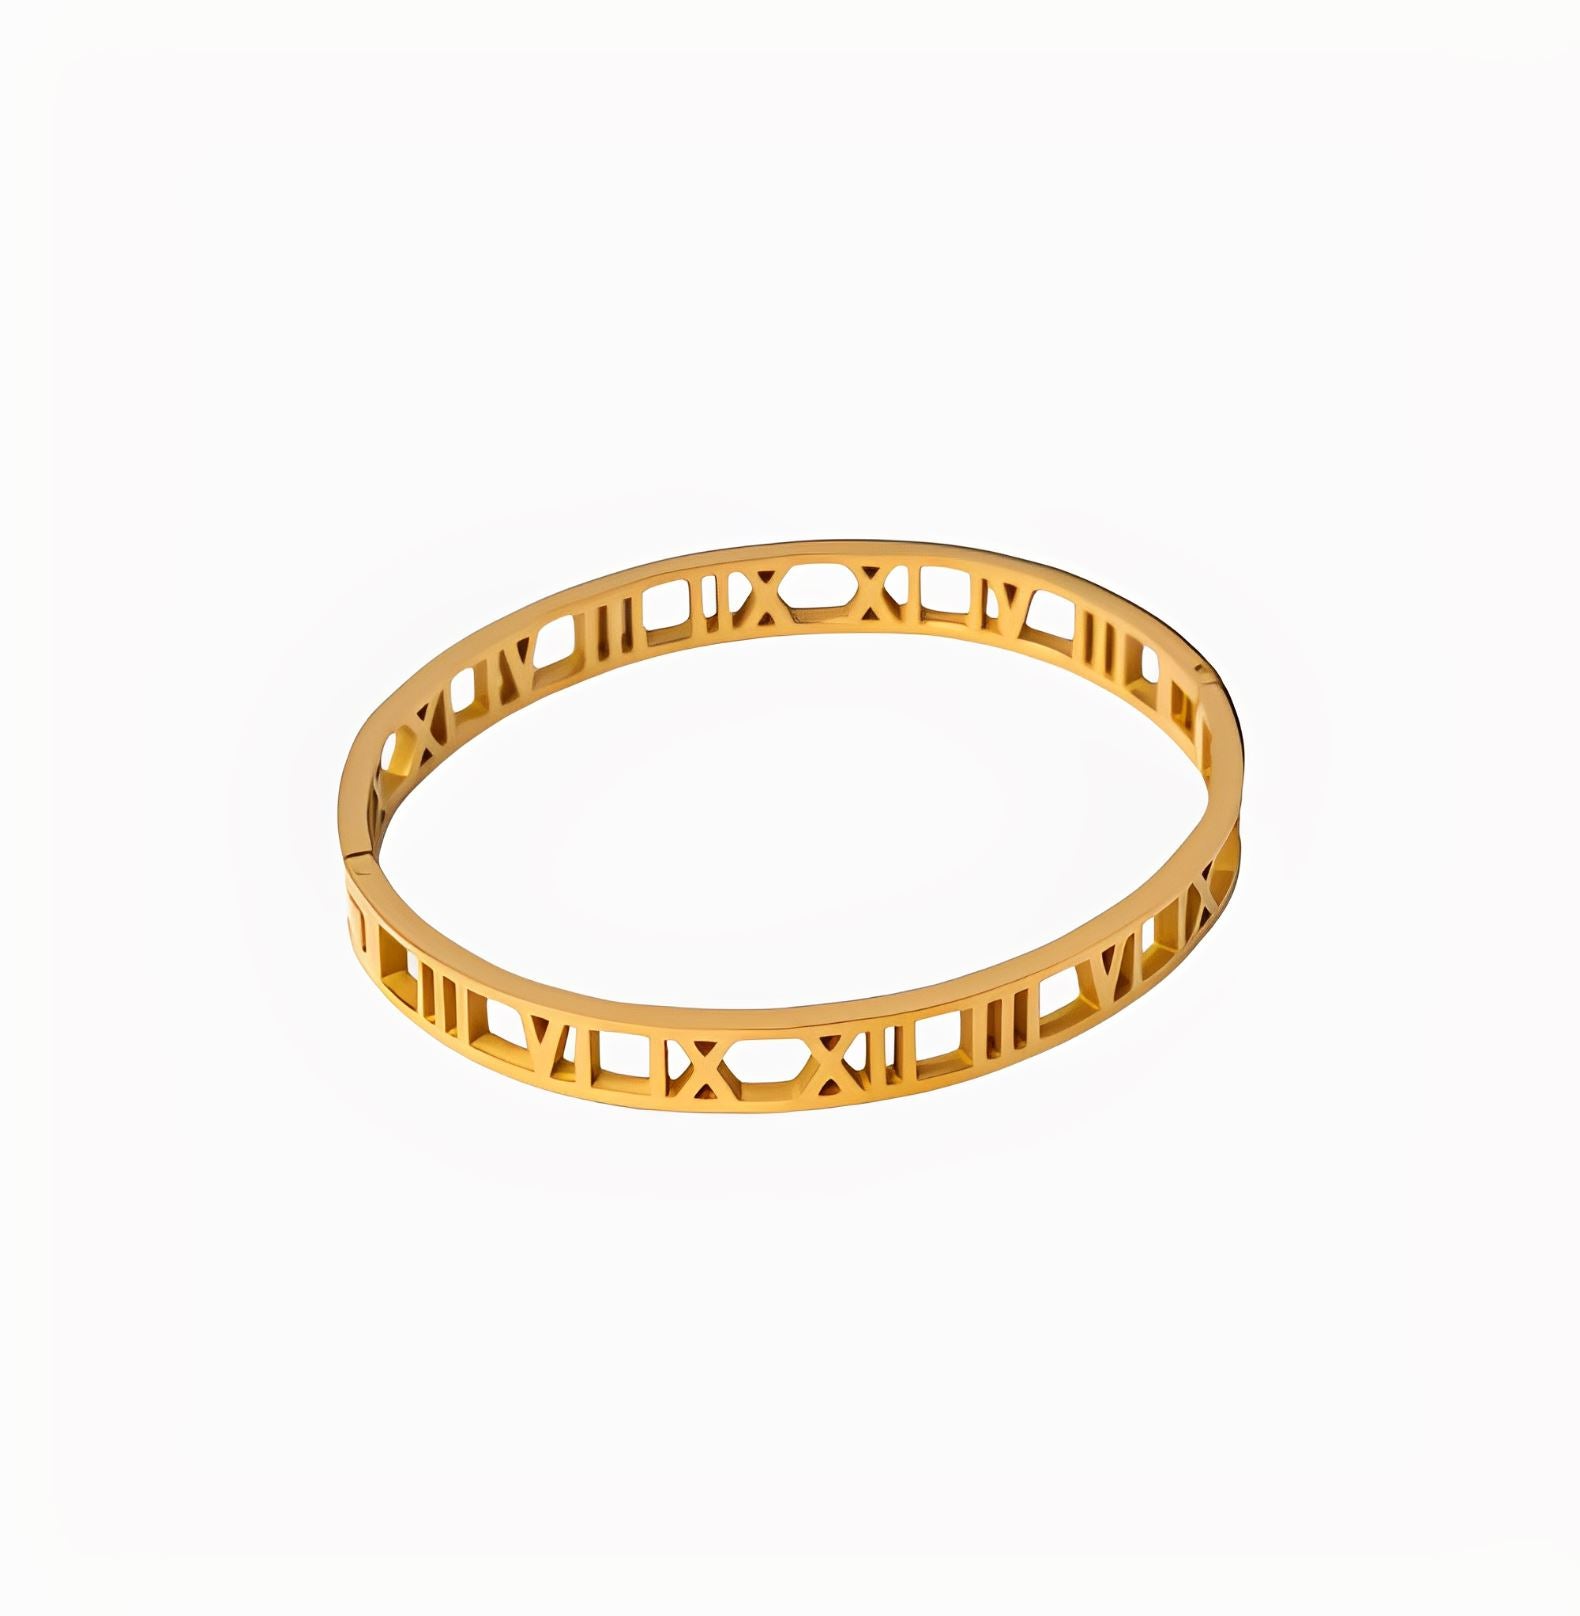 ROMAN NUMERALS BRACELET - GOLD braclet Yubama Jewelry Online Store - The Elegant Designs of Gold and Silver ! Gold 